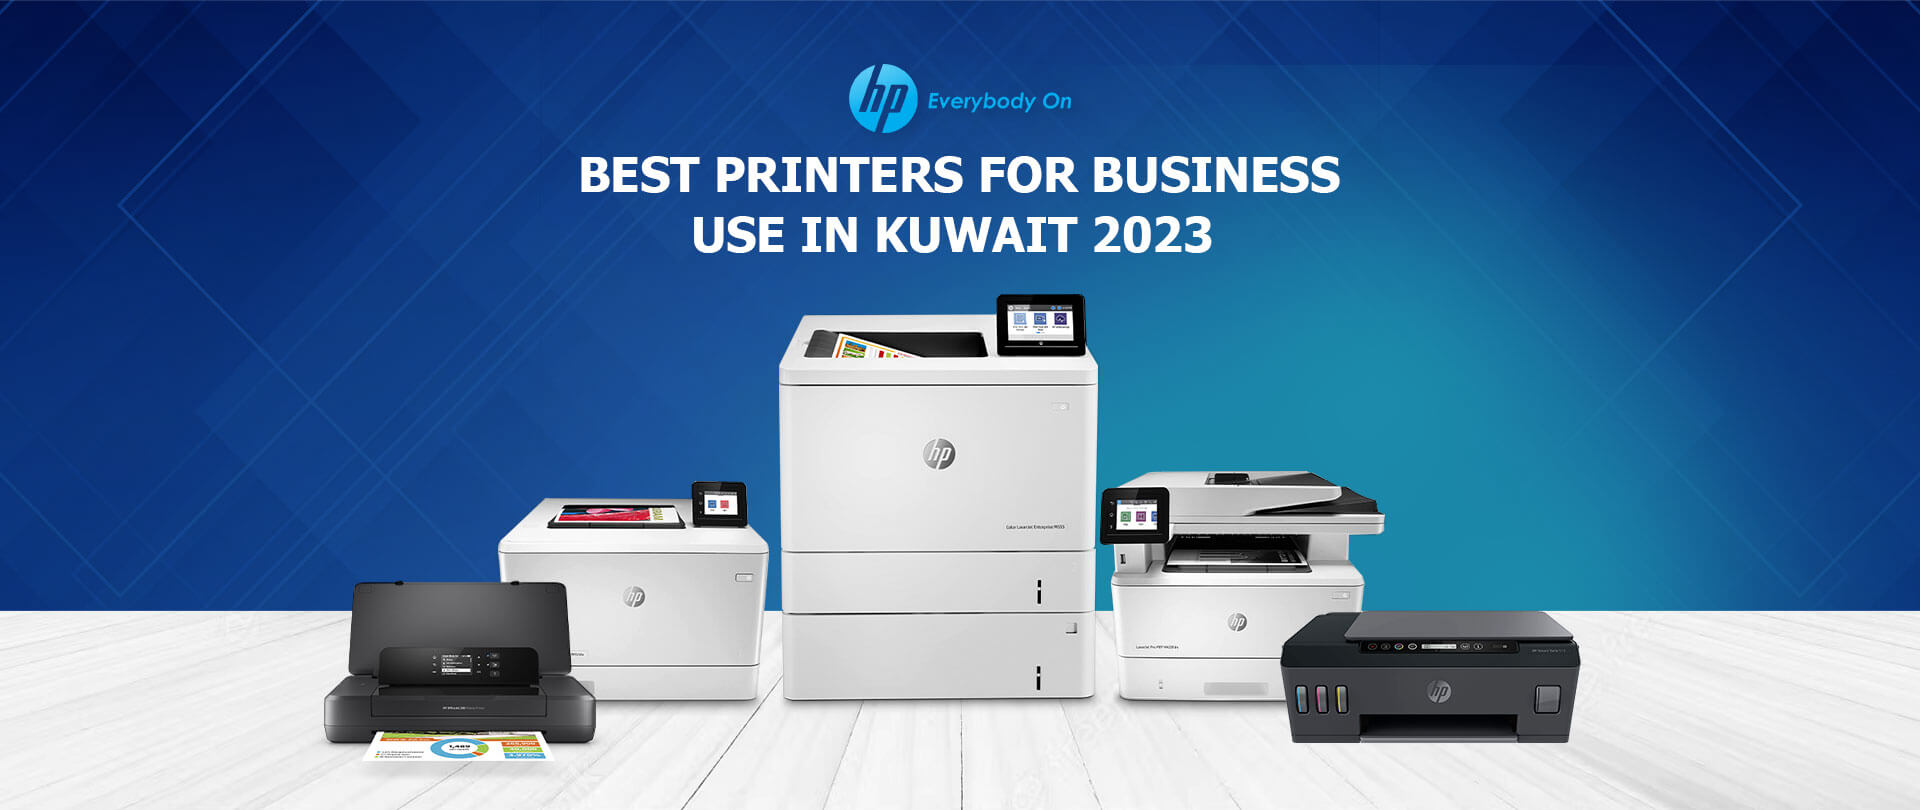 HP Best Printers For Business Use In Kuwait 2023